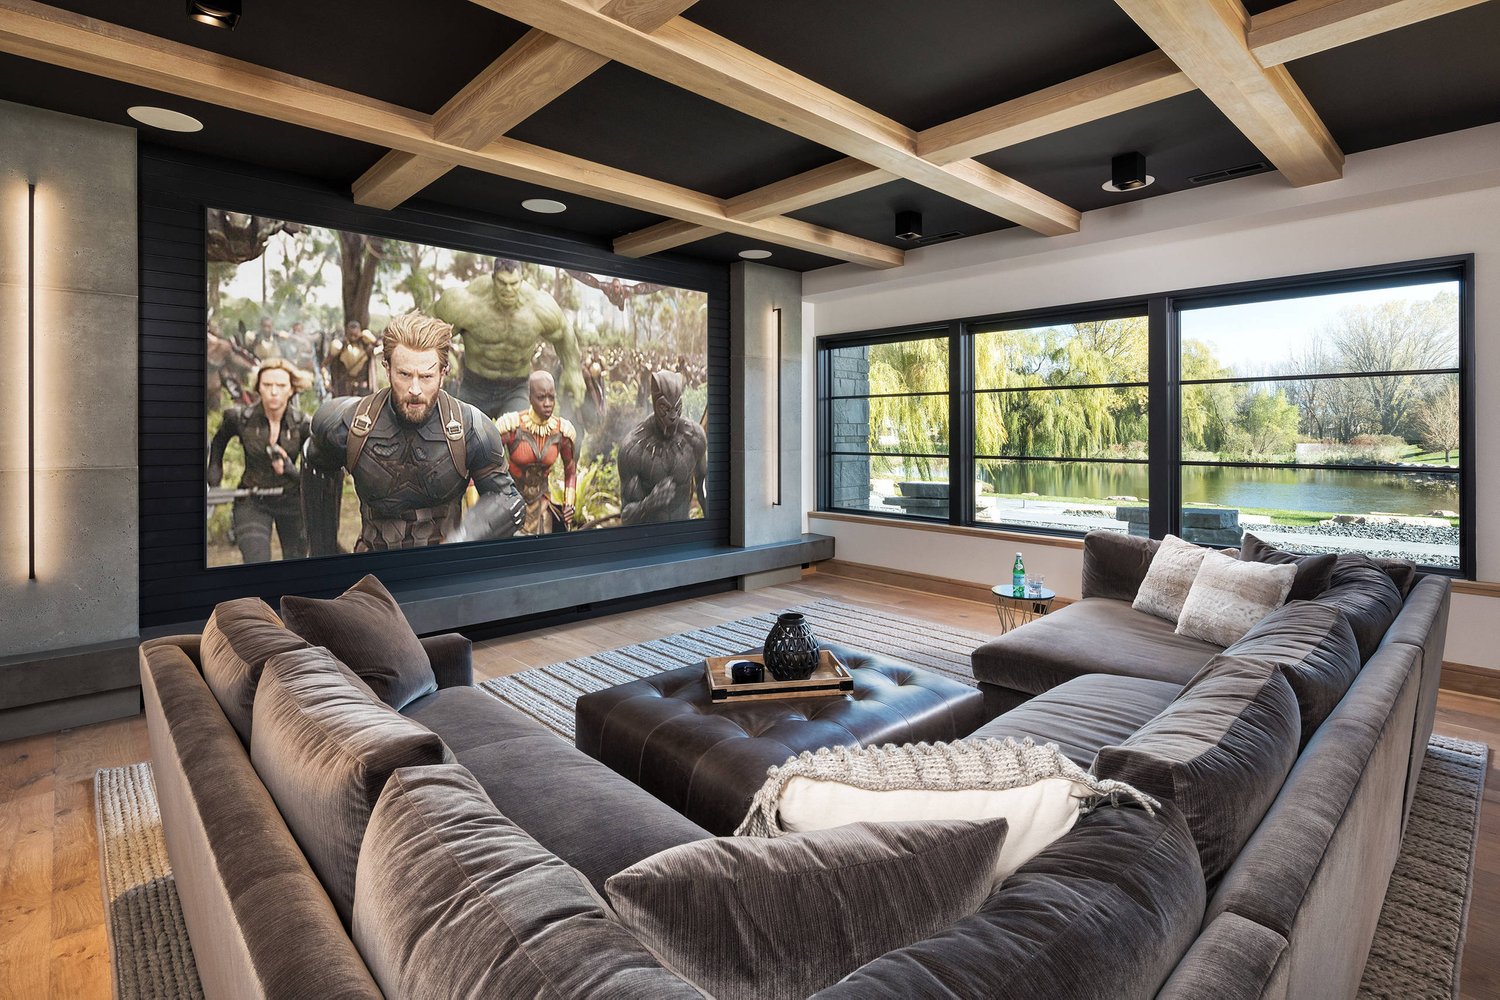 Things to Consider When Designing a Home Cinema